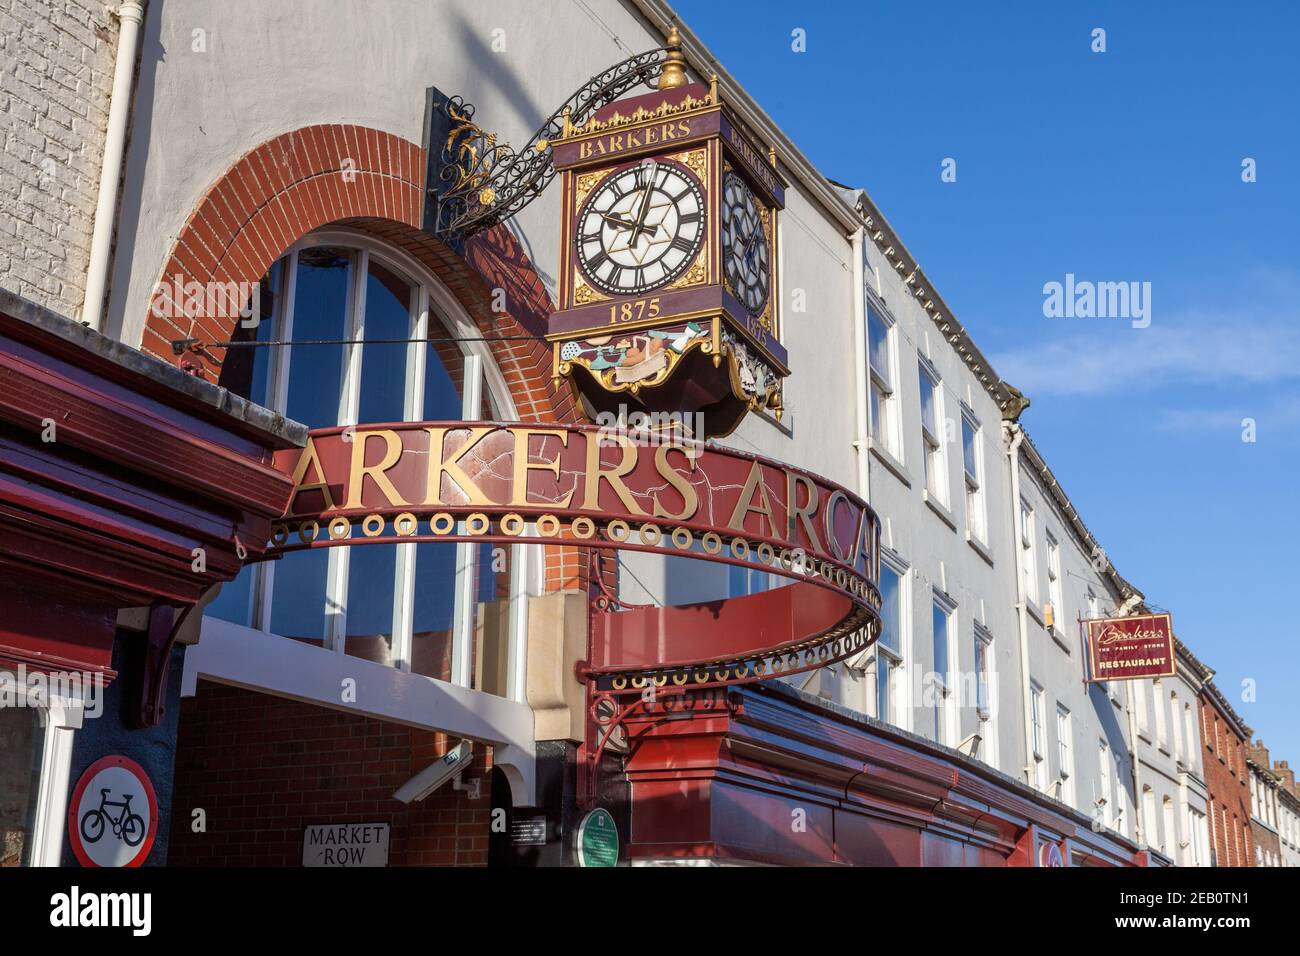 The ornate golden clock and sign marking the entrance to Barkers Arcade on Northallerton High Street Stock Photo